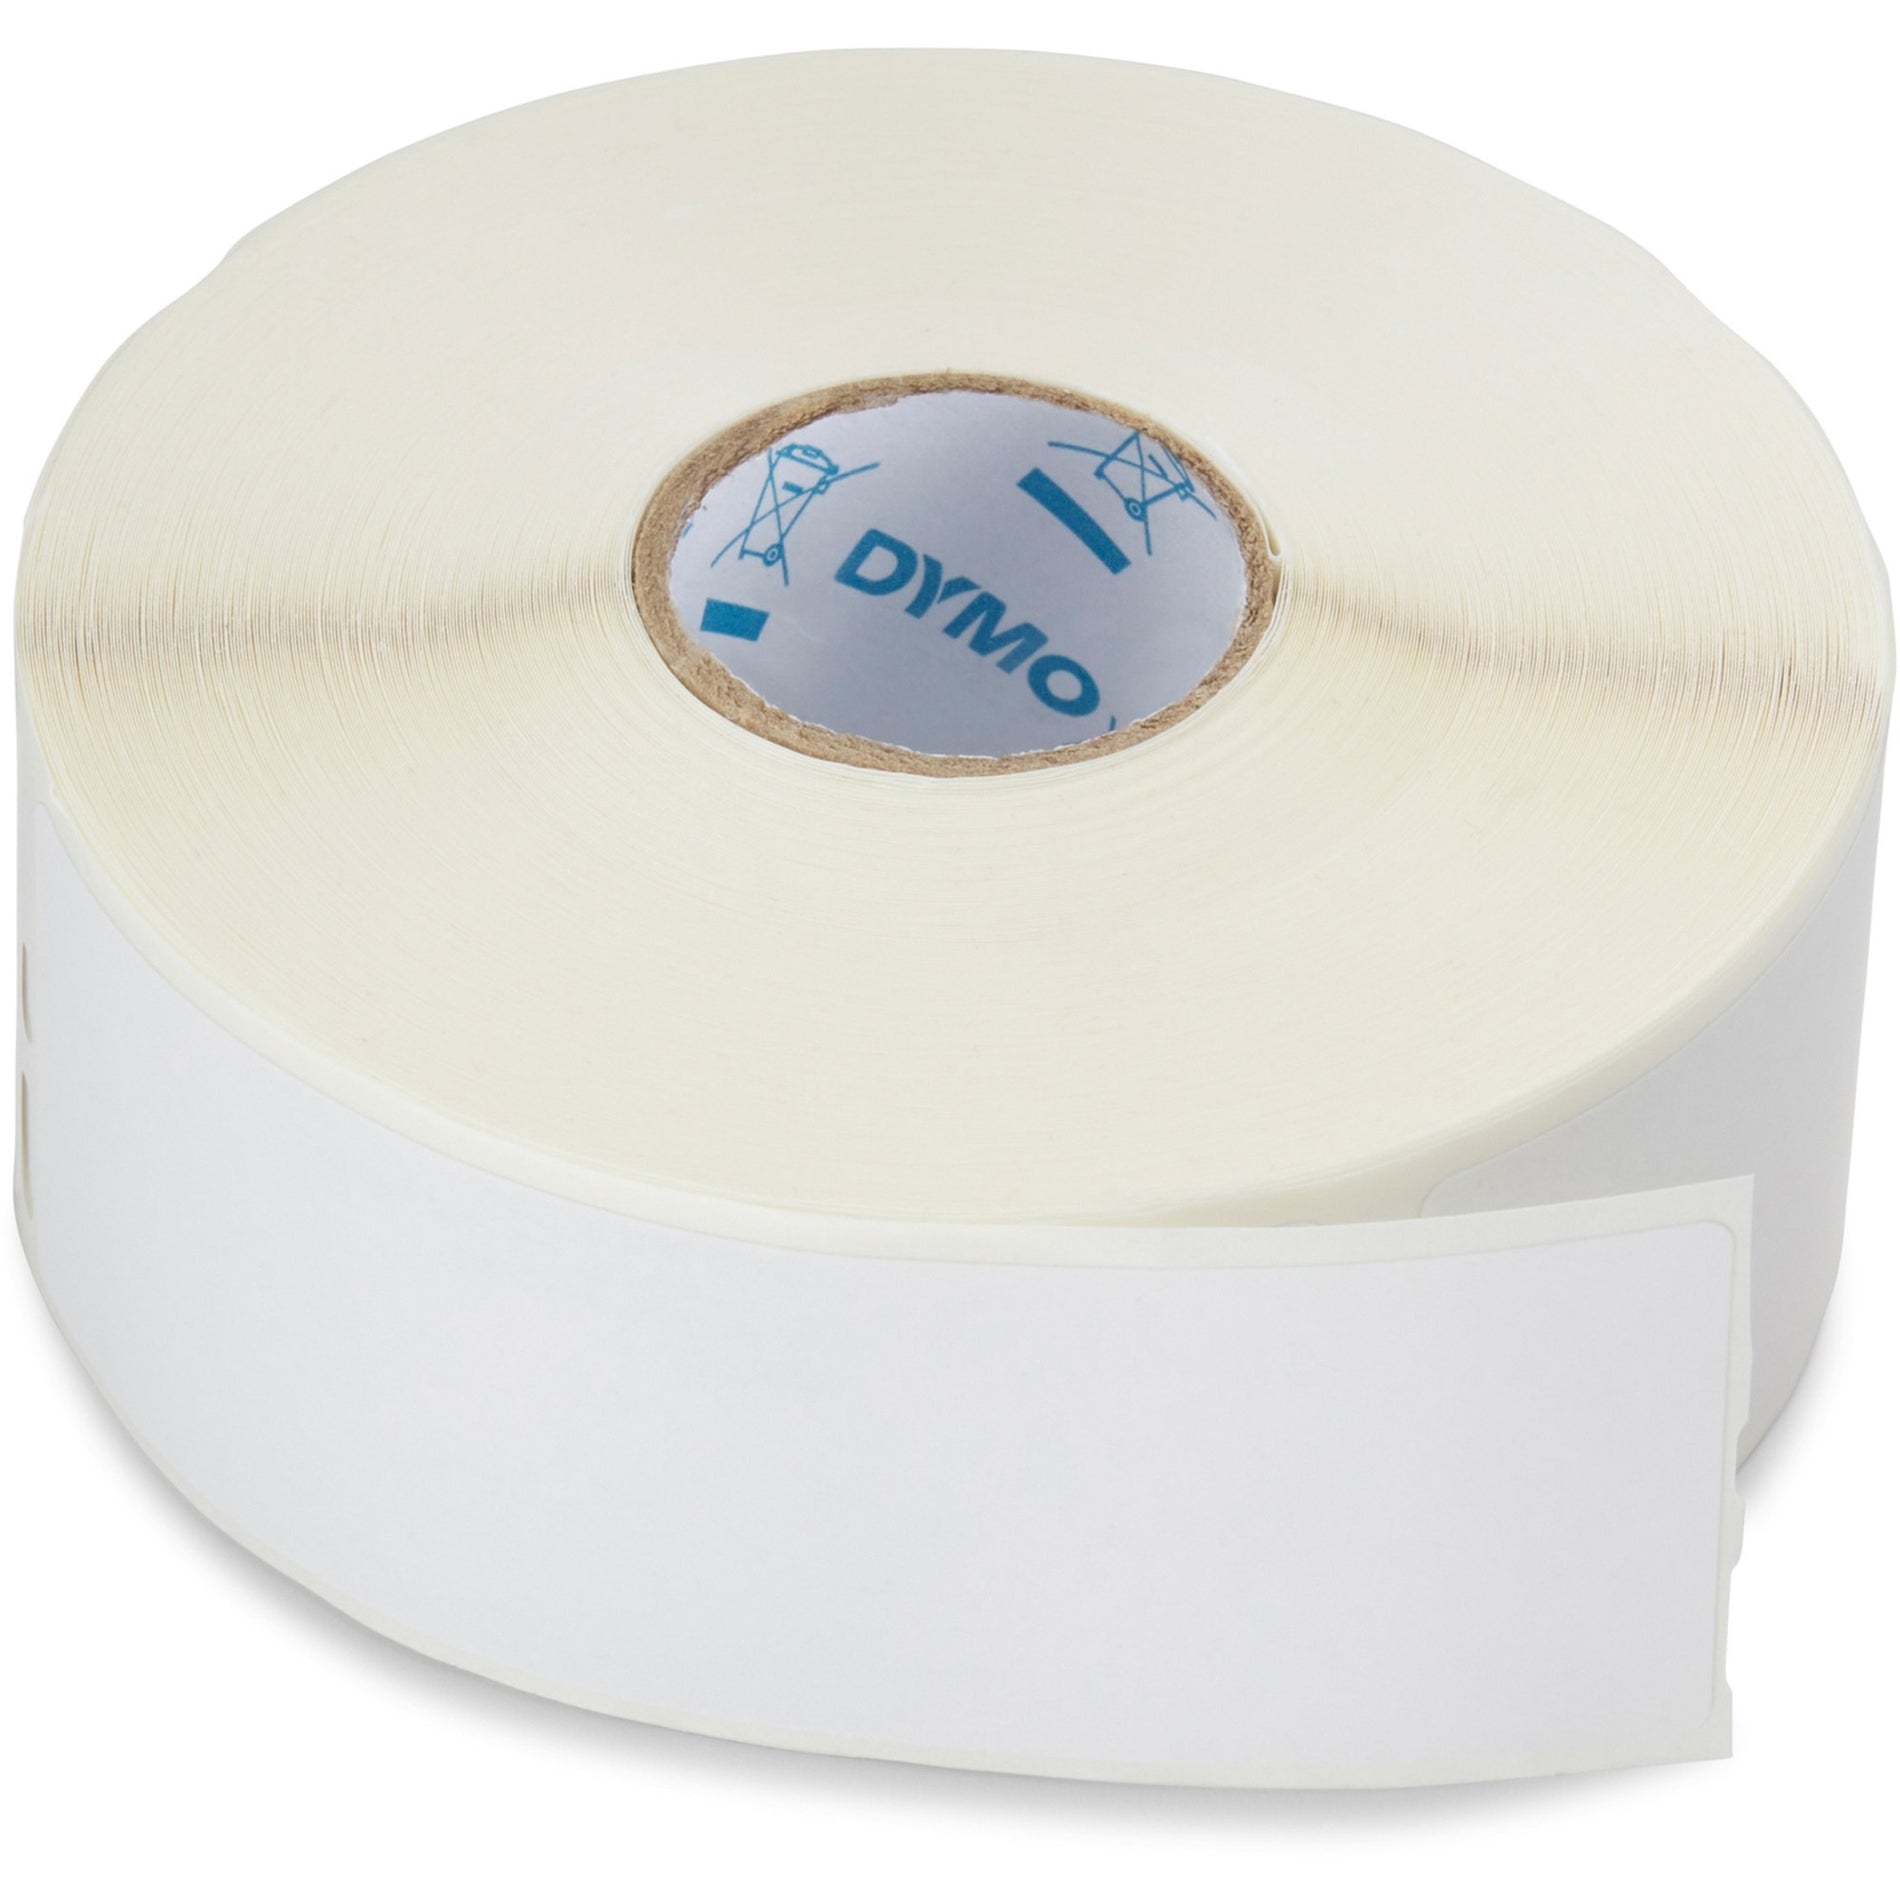 Dymo 30252 LabelWriter Address Labels, Self-adhesive, 1 1/8" x 3 1/2", 350 Labels per Roll